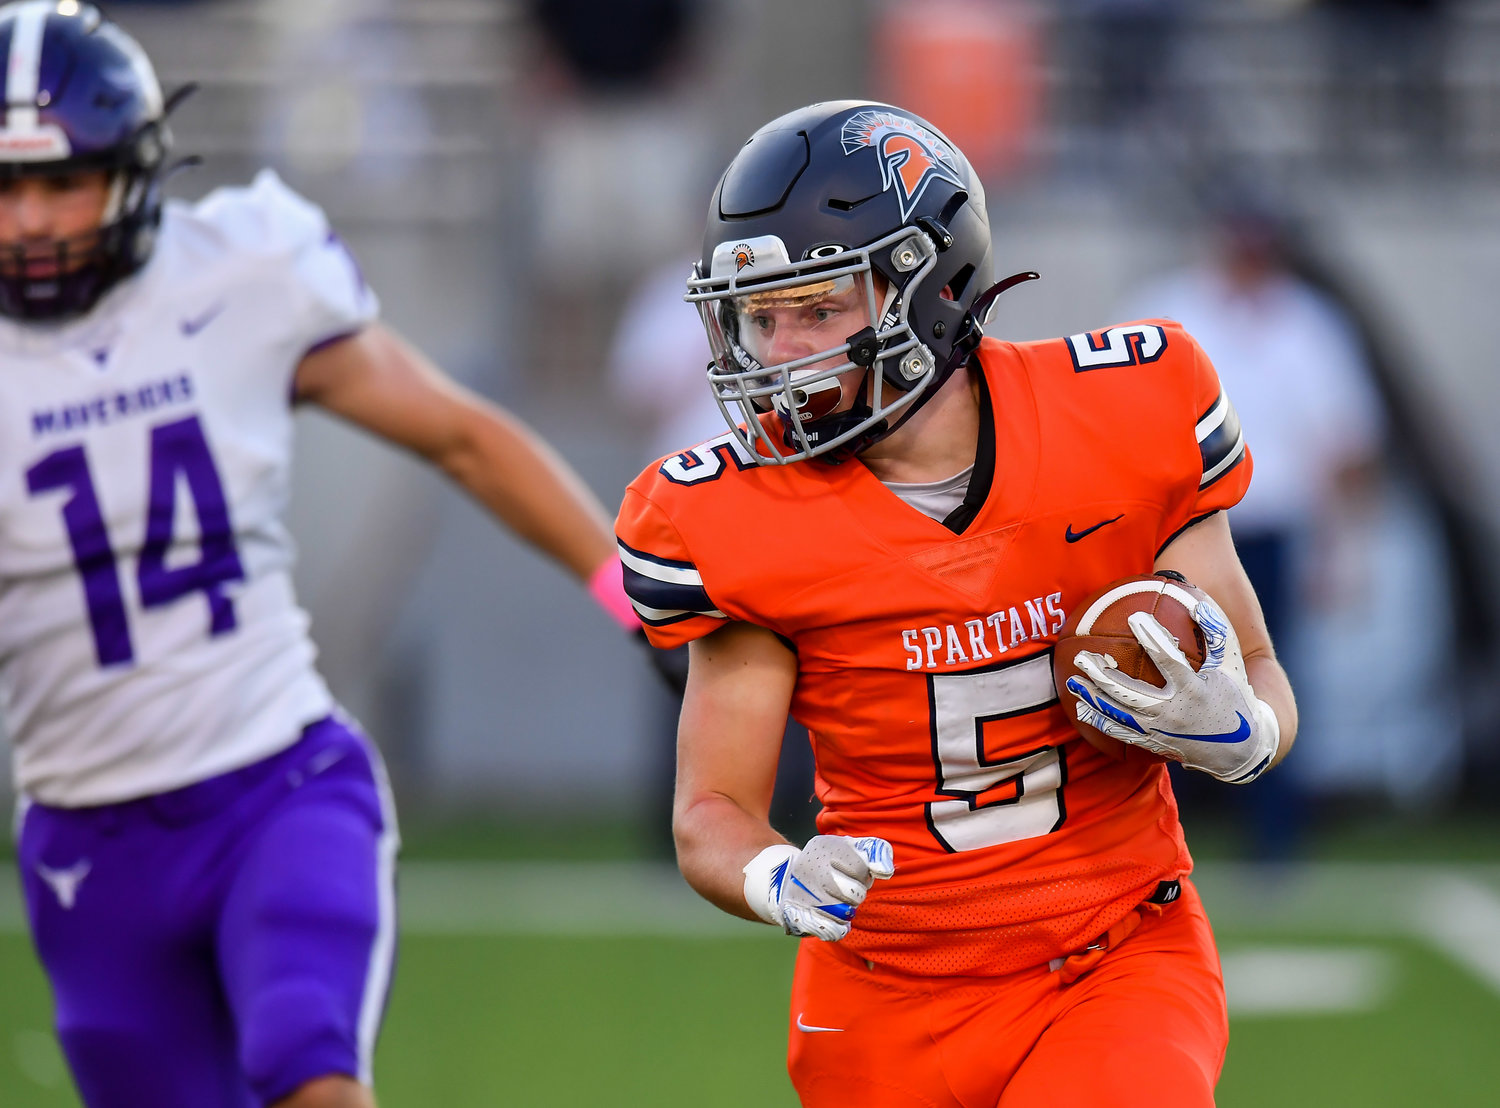 Katy, Tx. Oct 8, 2021: Seven Lakes Barrett Hudson #5 carries the ball during a District 19-6A game between Seven Lakes and Morton Ranch at Legacy Stadium in Katy. (Photo by Mark Goodman / Katy Times)